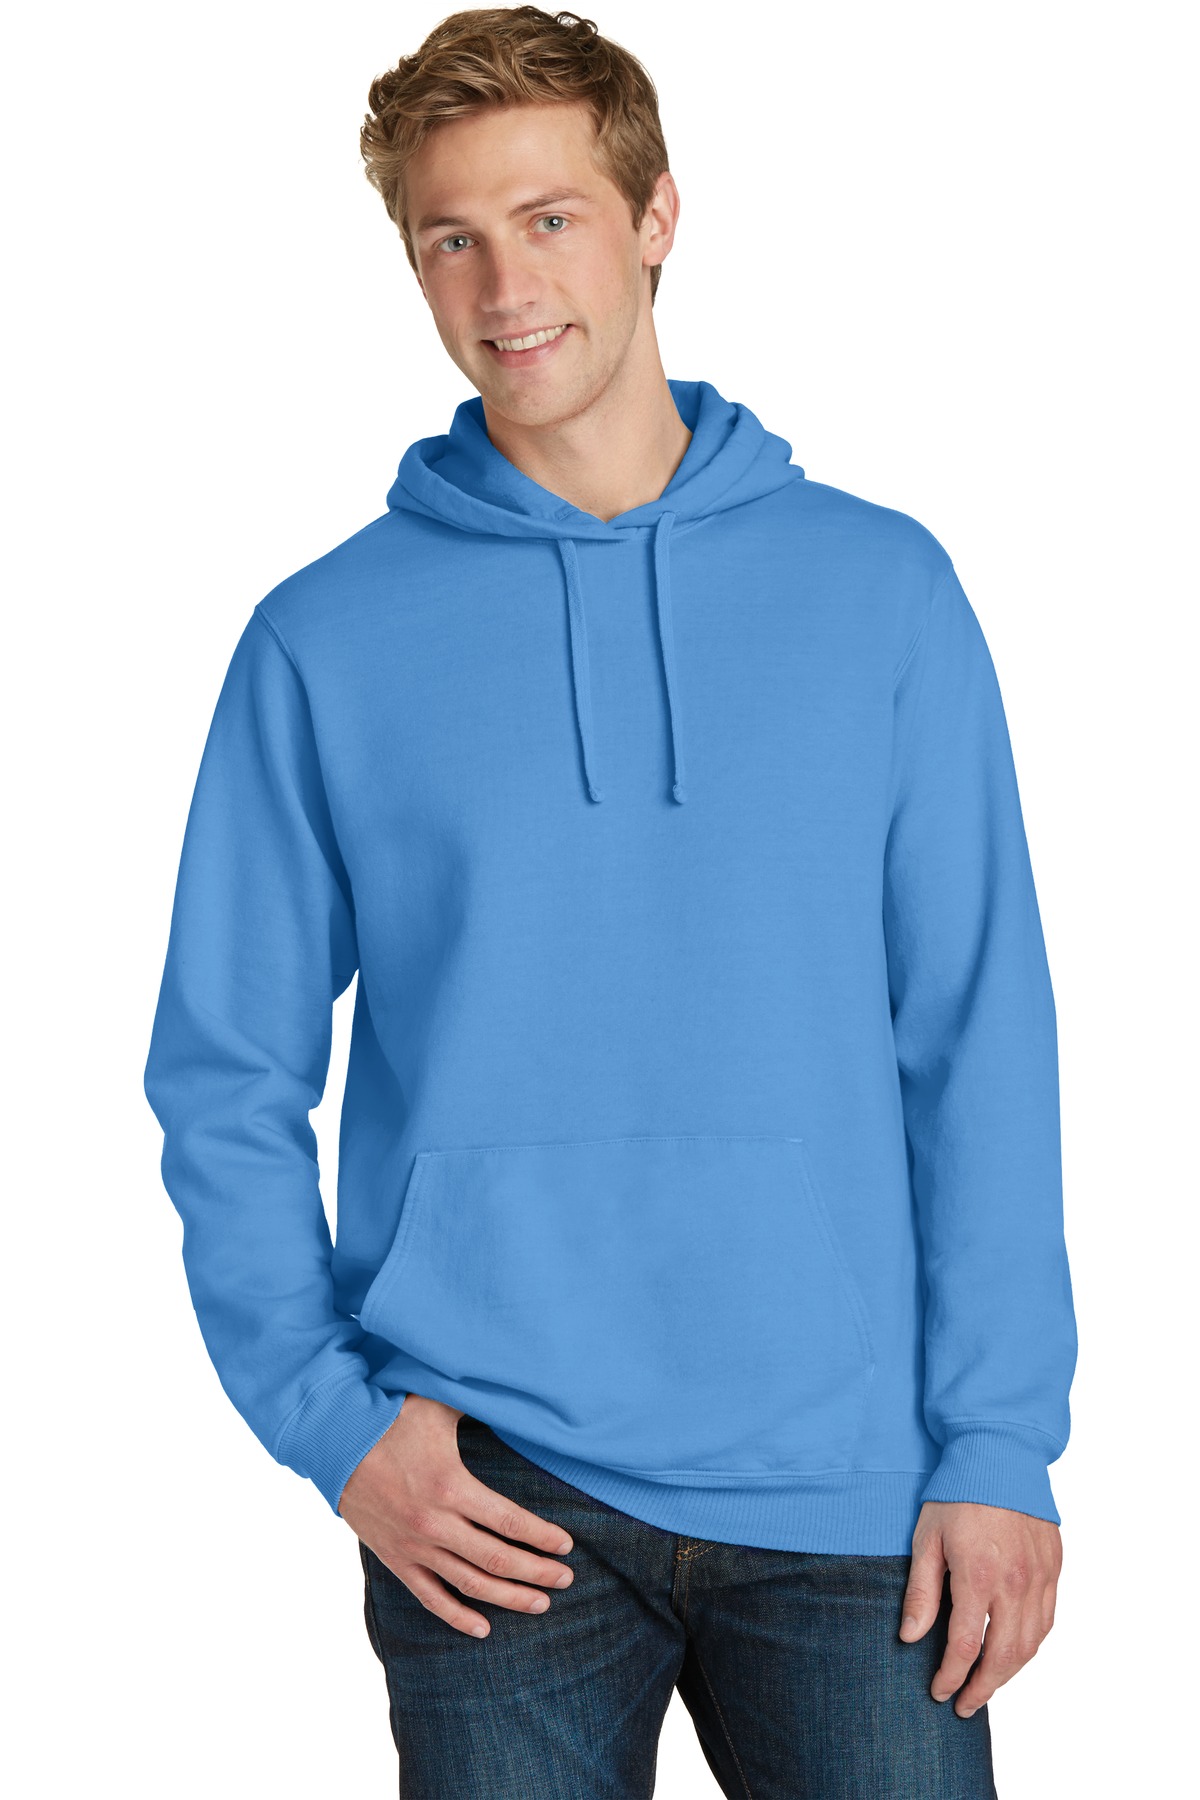 Port & Company Men's Essential Pigment-Dyed Pullover Hooded Sweatshirt PC098H